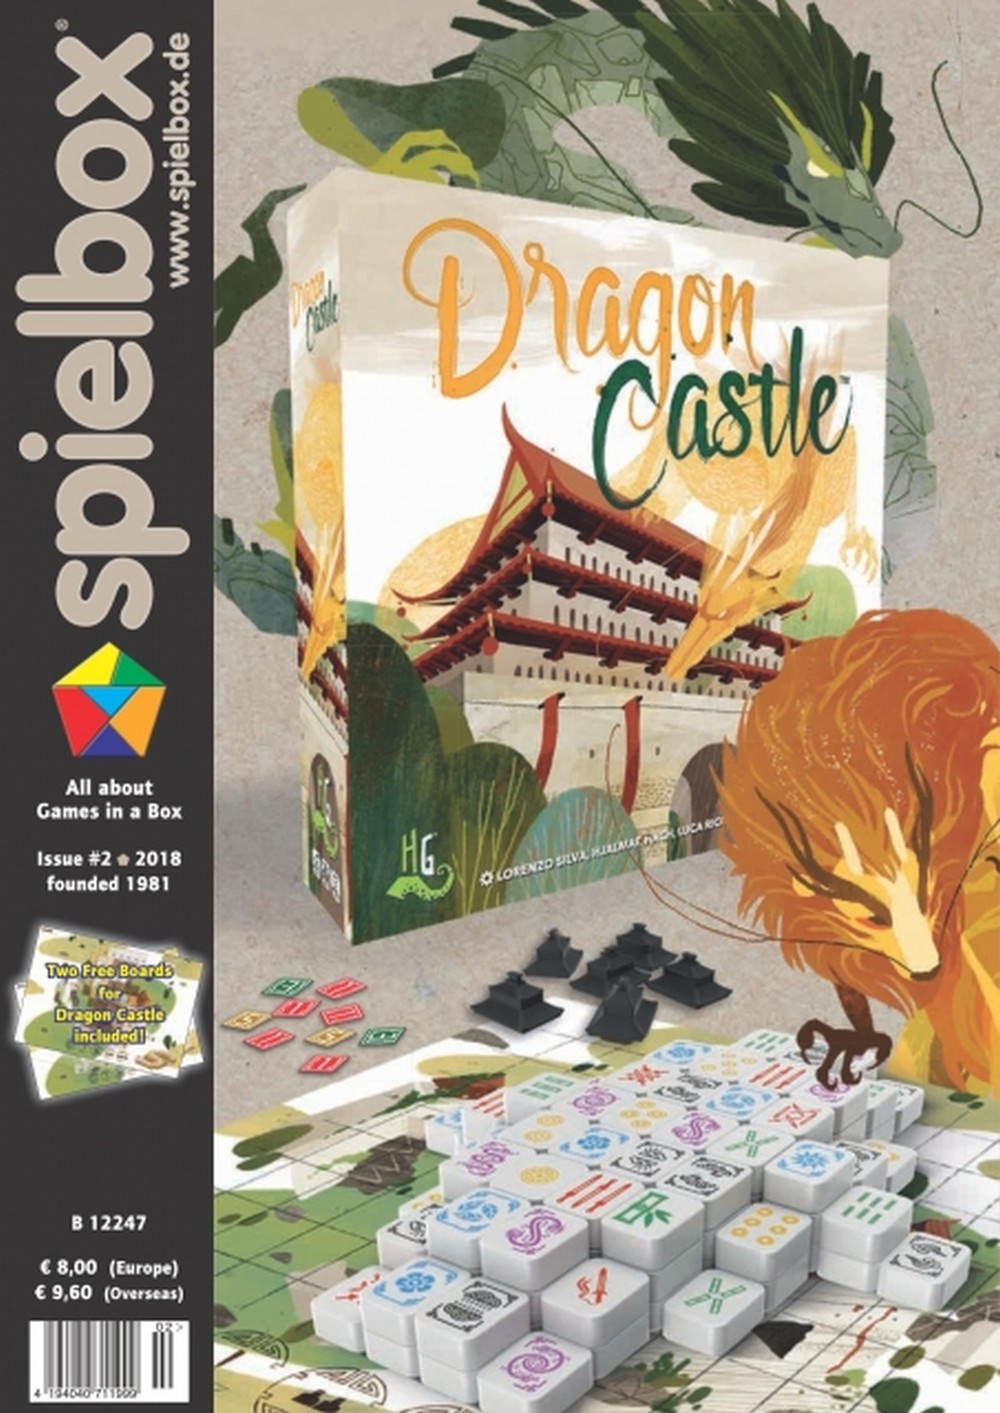 Spielbox magazine 02 2018 with Two Free Boards for Dragon Castle